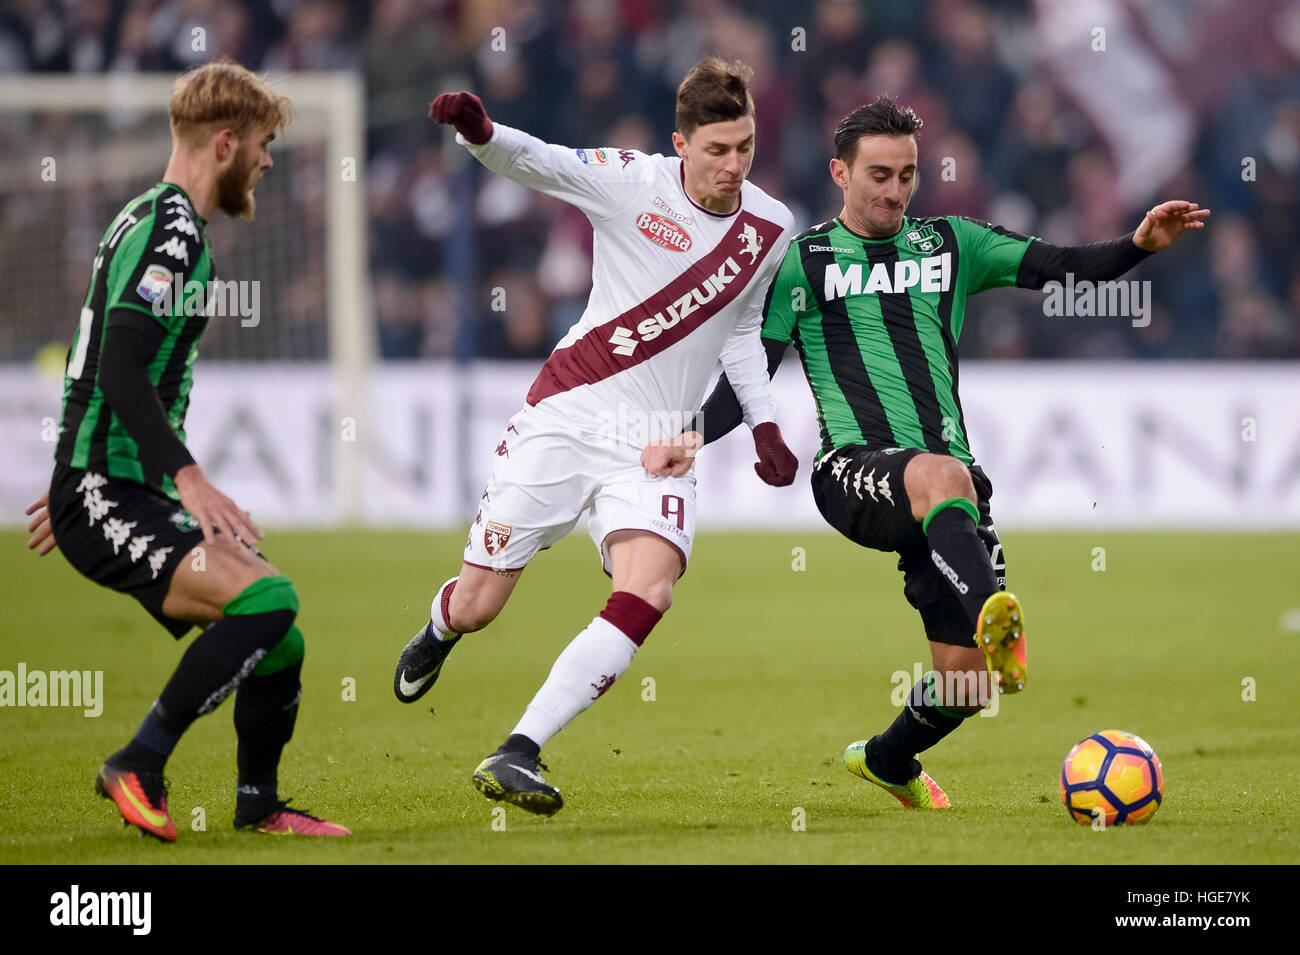 Reggio nell'Emilia, Italy. 8th Jan, 2017. Daniele Baselli of Torino FC and Alberto Aquilani (right) of US Sassuolo compete for the ball during the Serie A football match between US Sassuolo and Torino FC. The final result of the match is 0-0. © Nicolò Campo/Alamy Live News Stock Photo